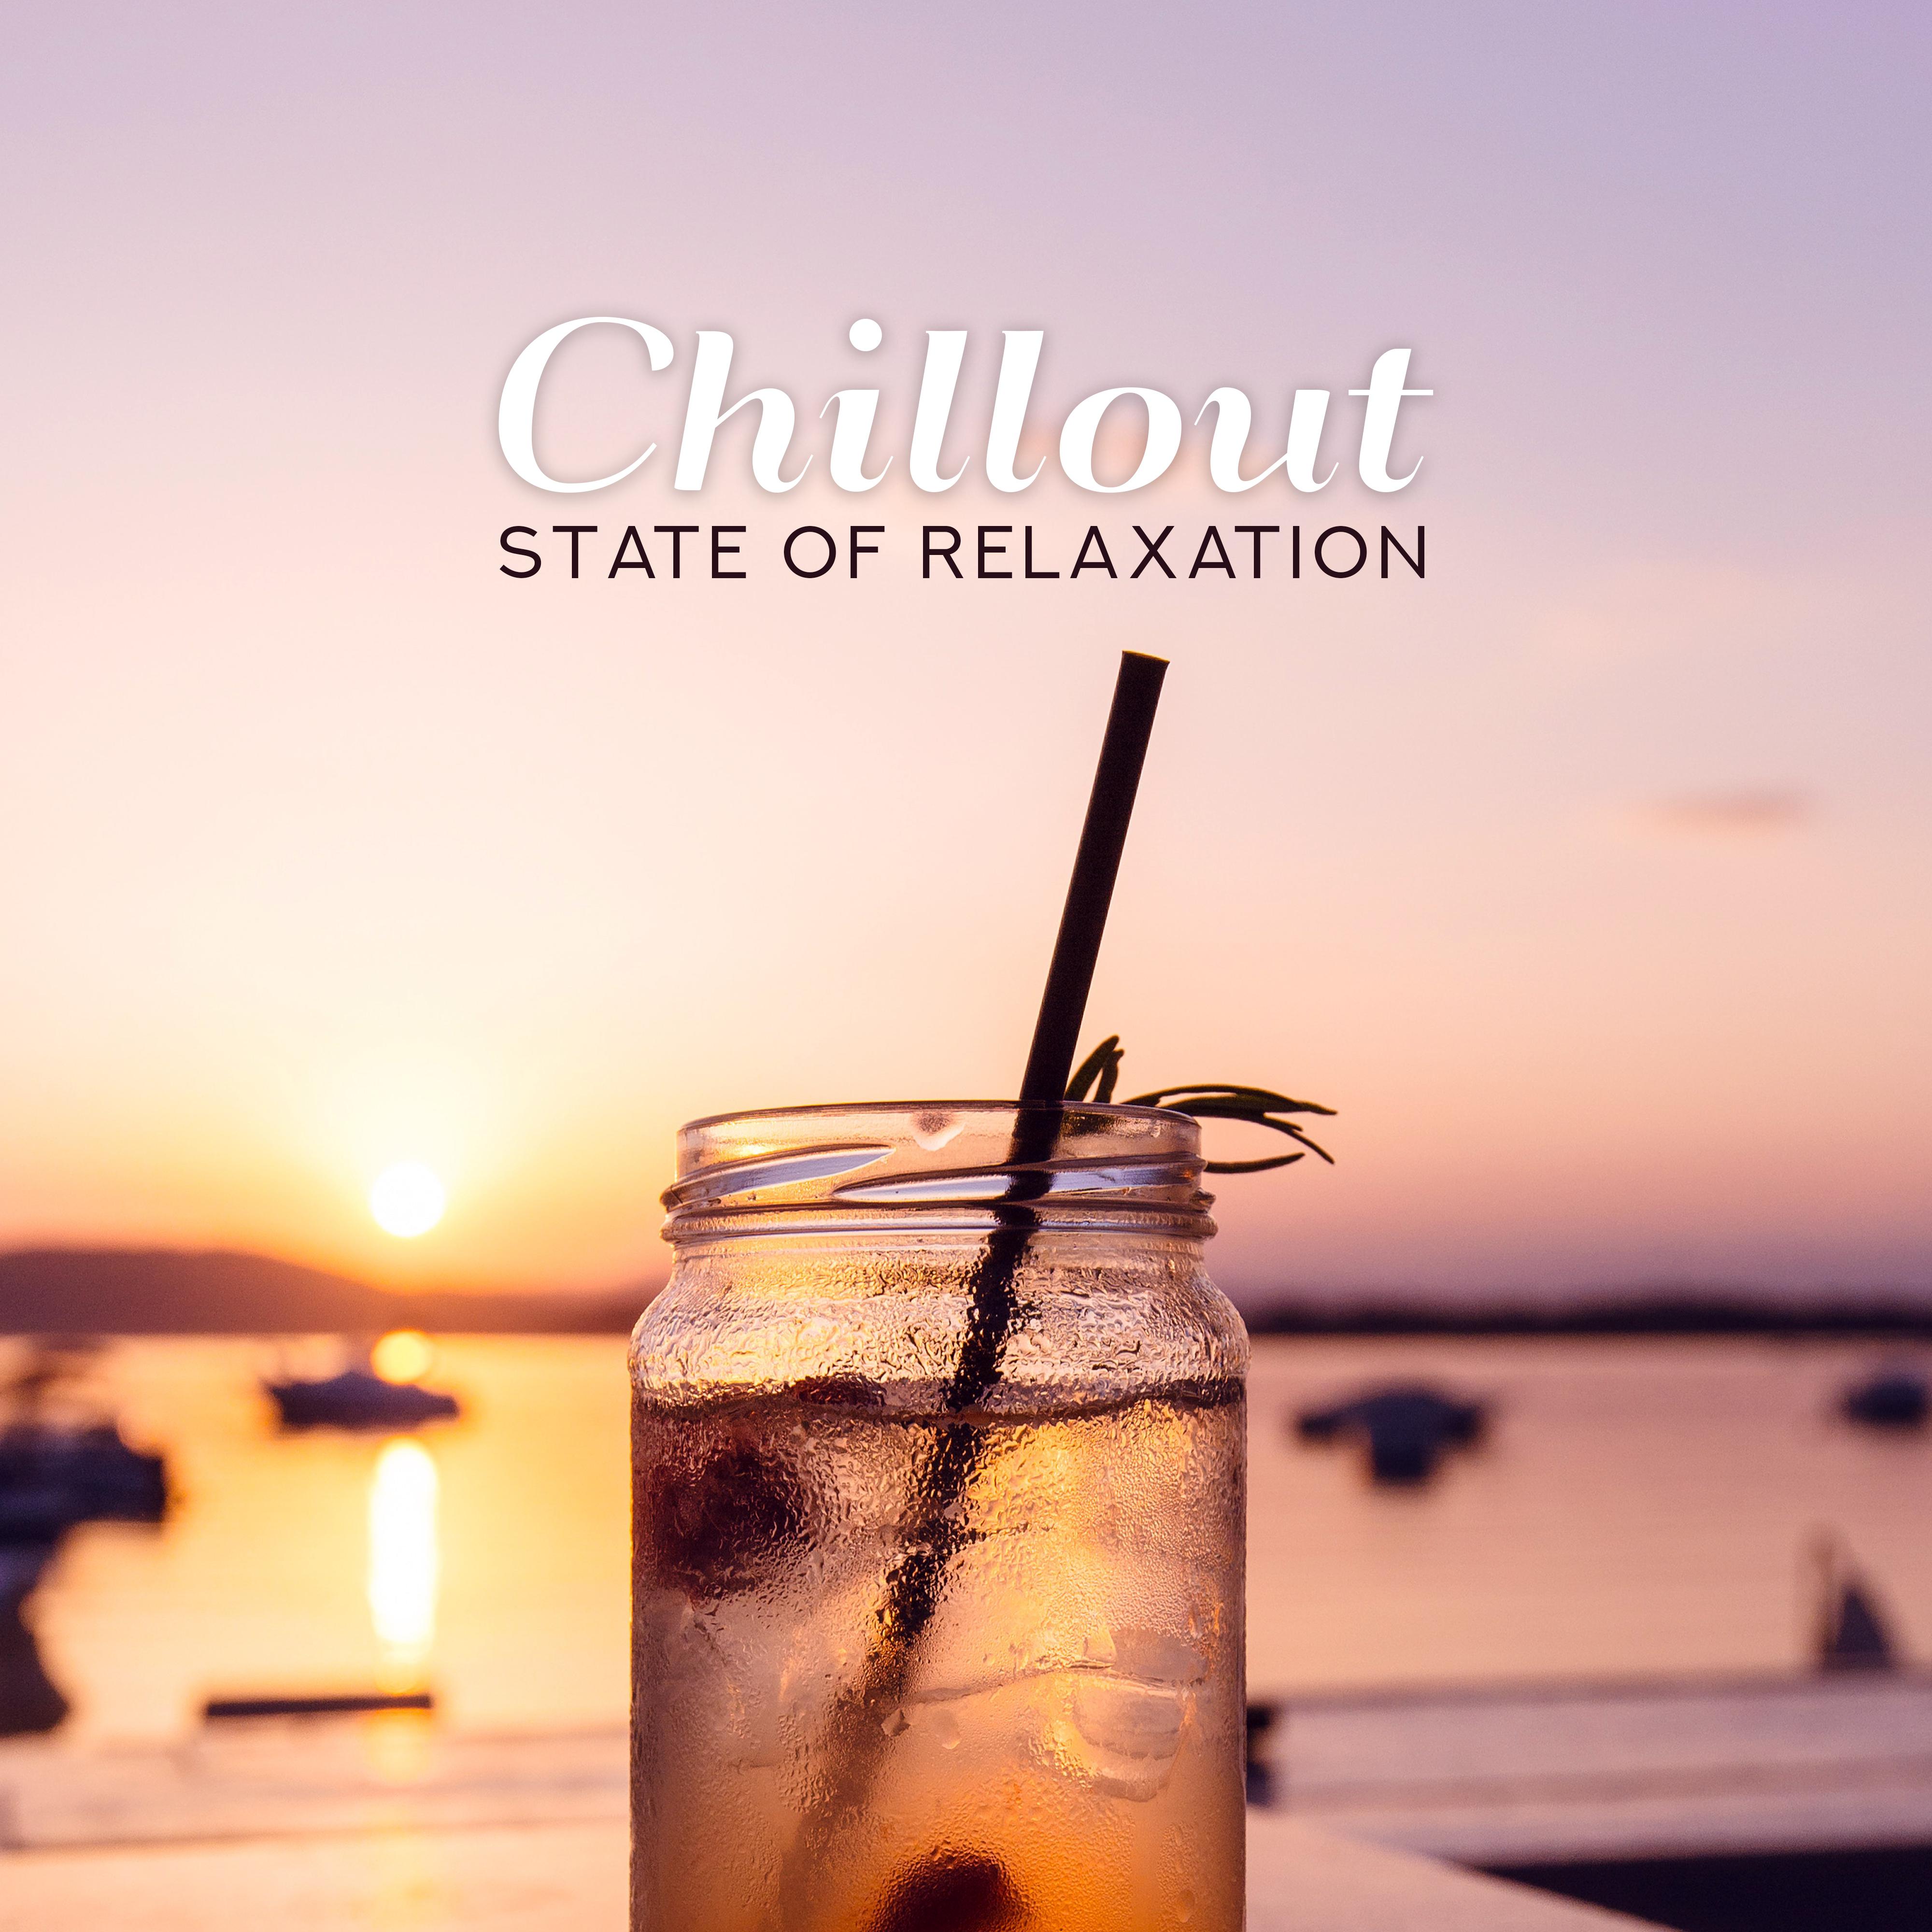 Chillout State of Relaxation